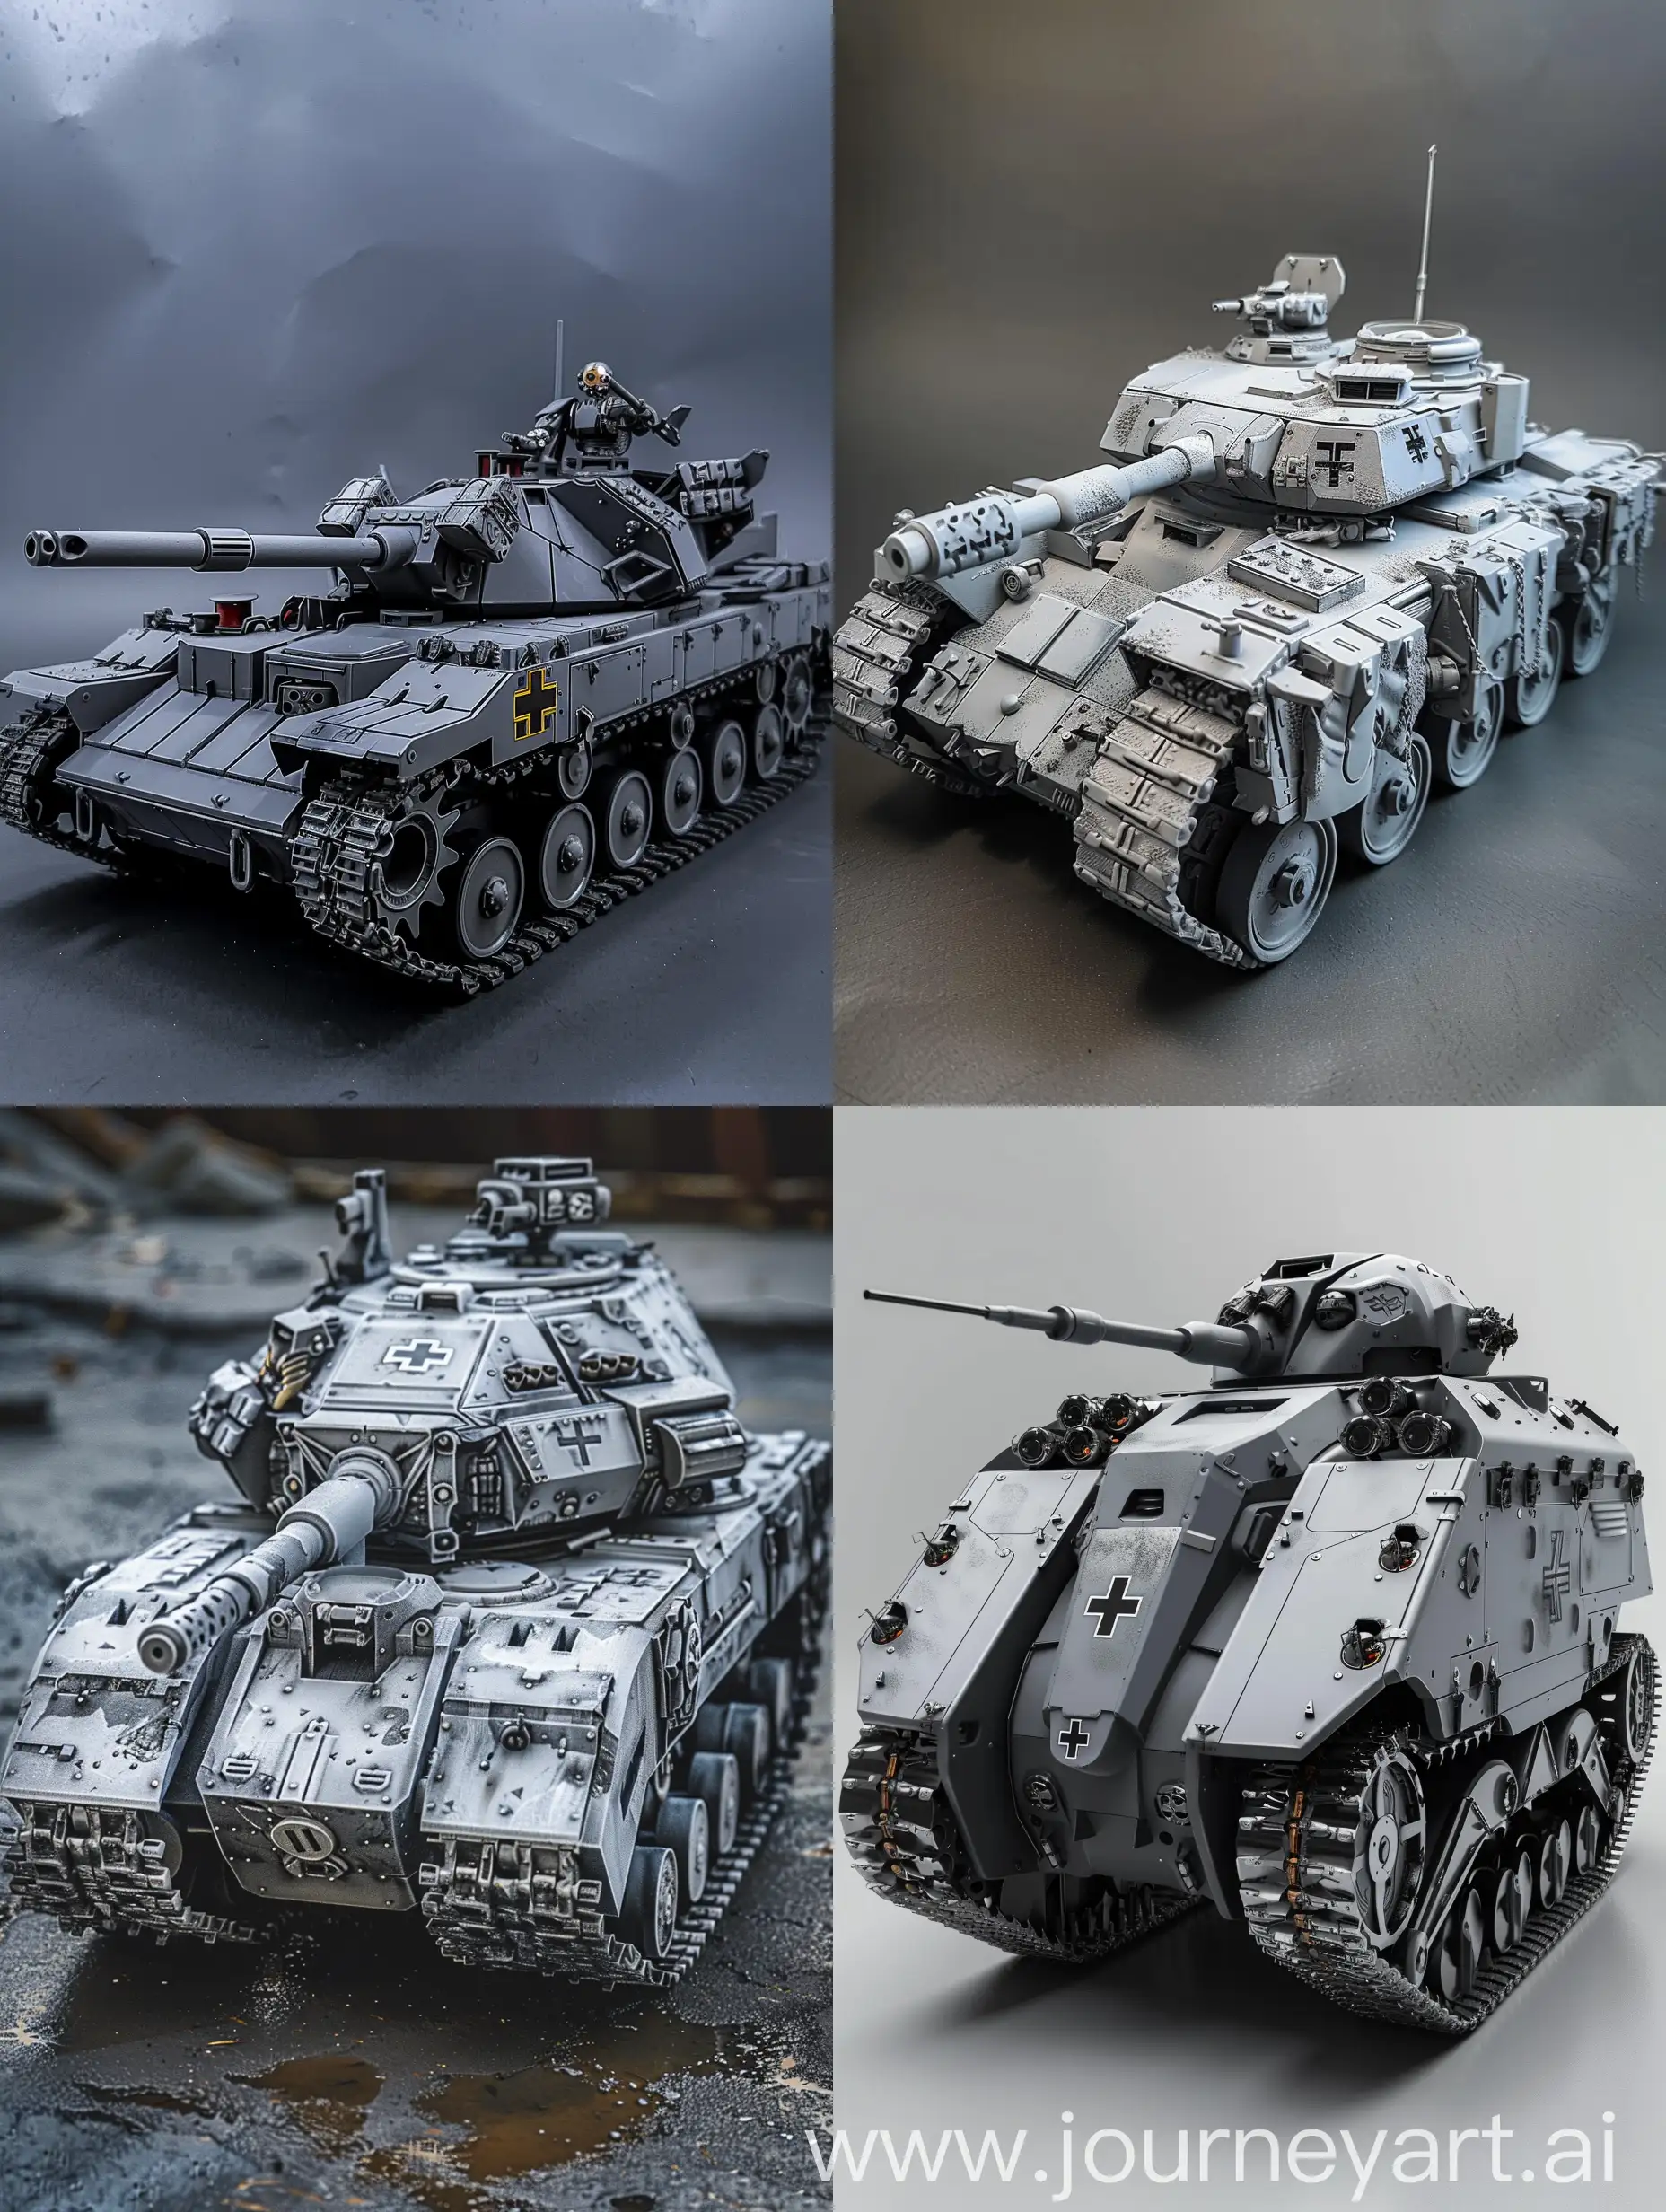 German-CyborgTank-of-the-Third-Reich-Resembling-KV44-Painted-in-Gray